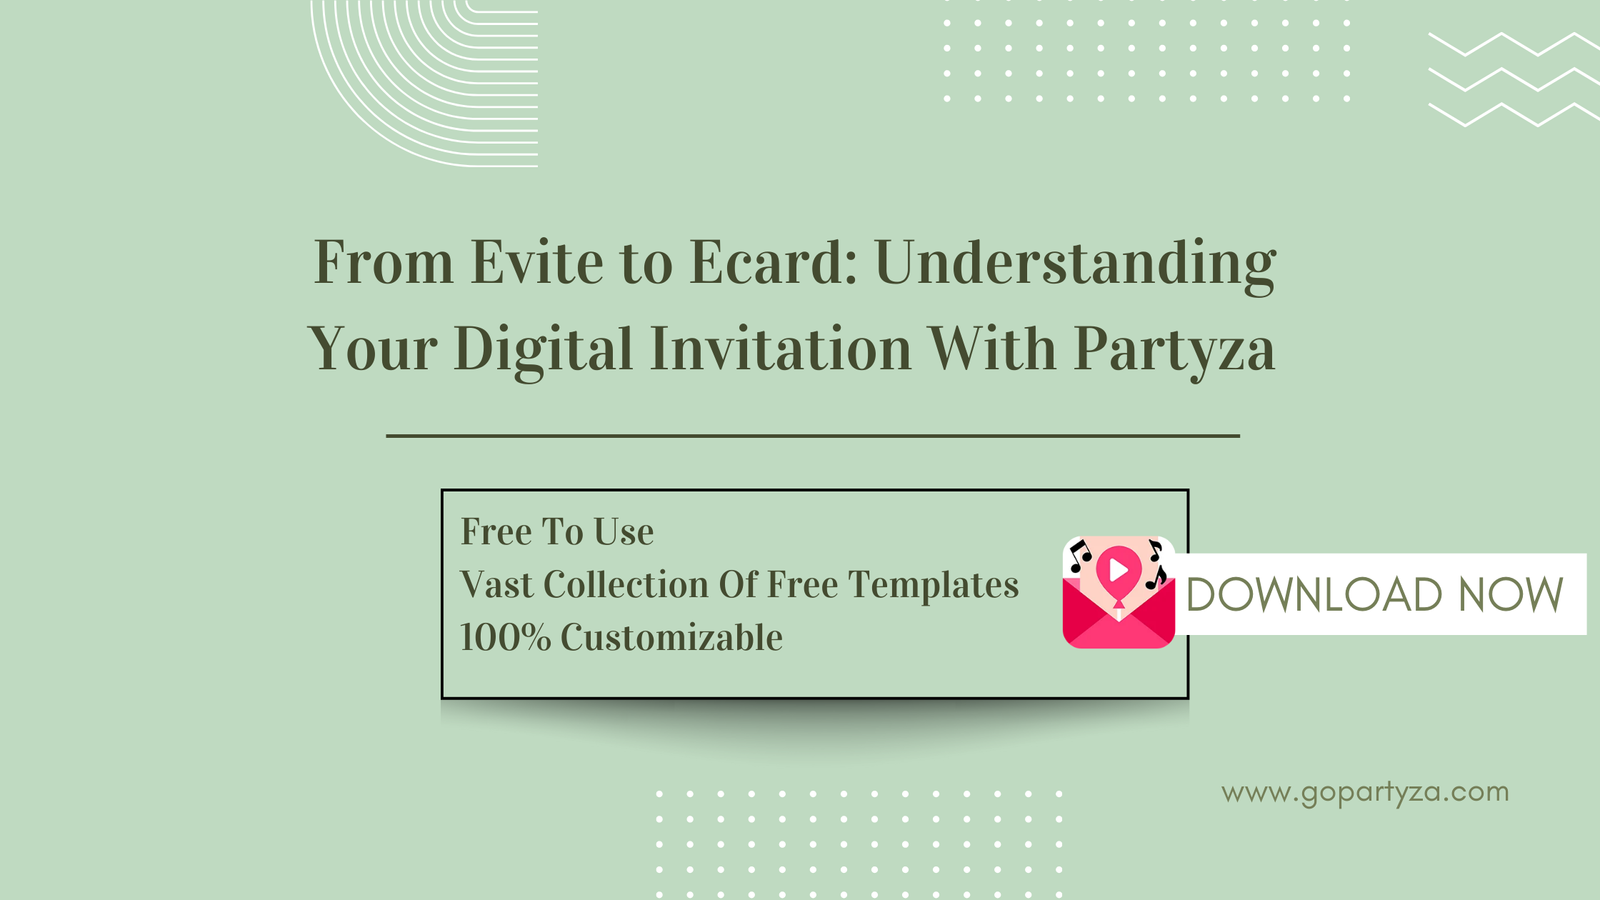 Evite or Ecard: Understanding Your Digital Invitation With Partyza